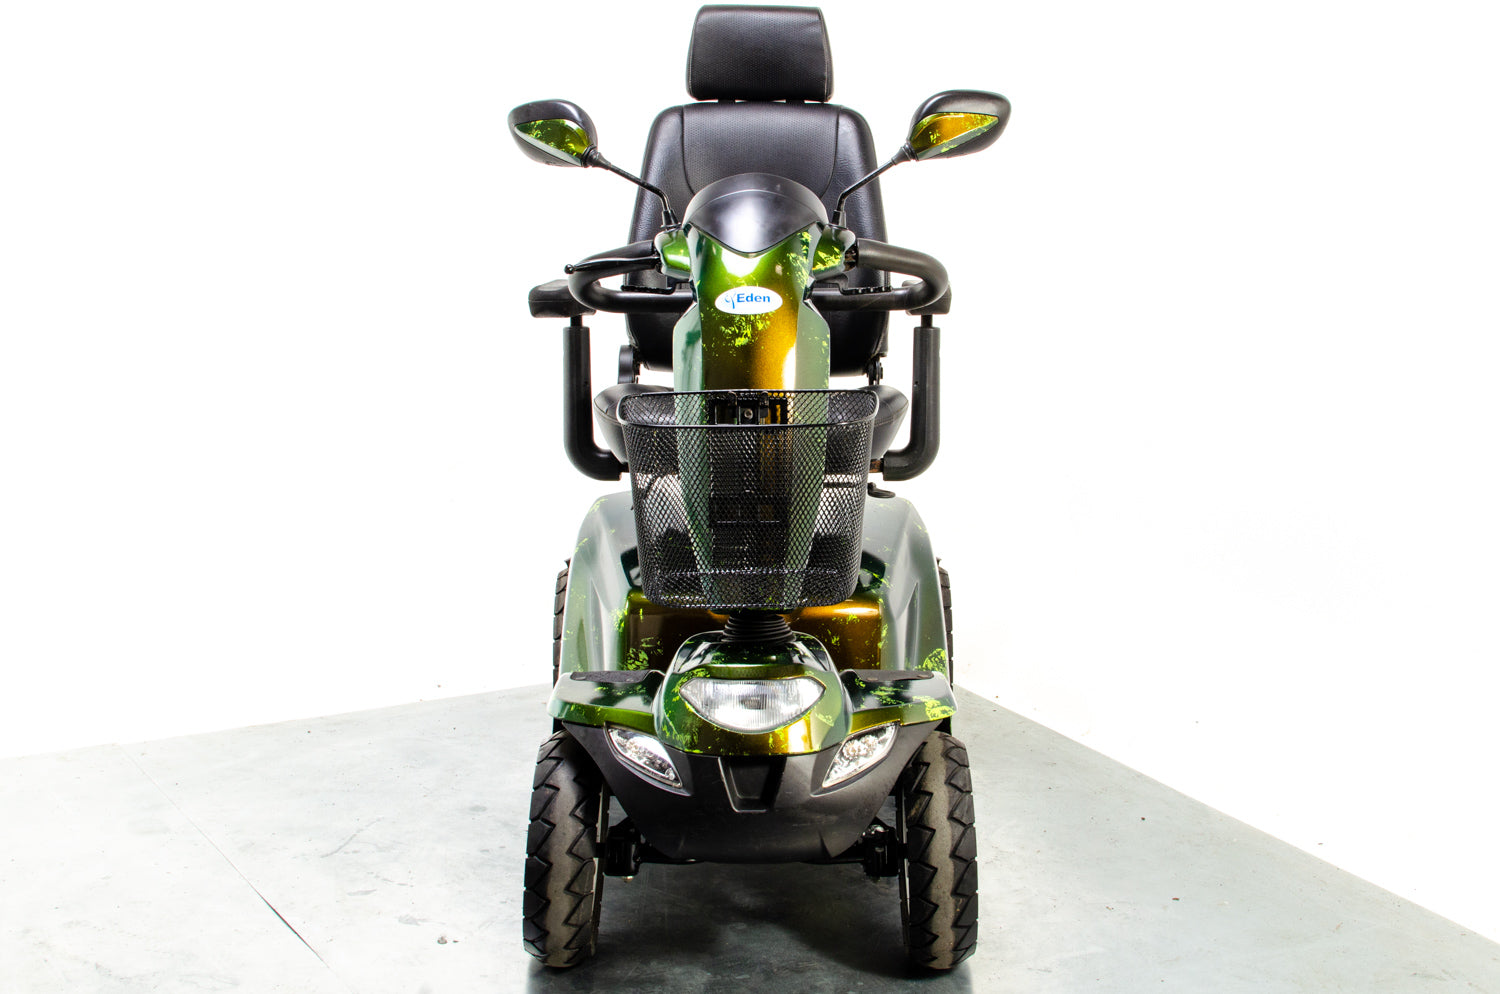 Drive Strider ST5D Used Mobility Scooter 8mph Road Legal Custom Paint Green